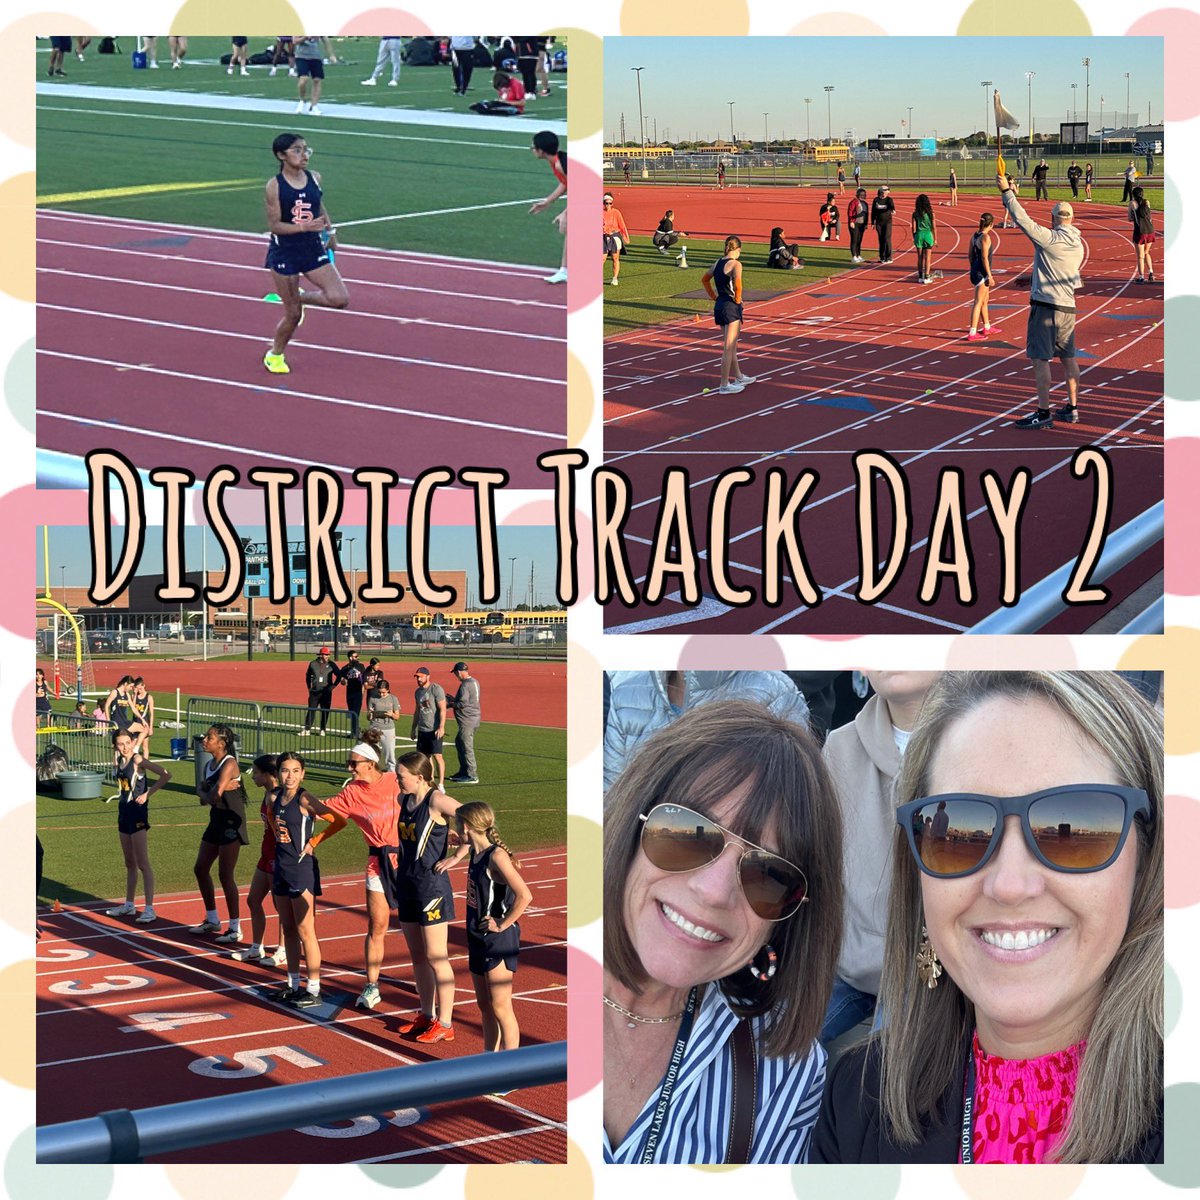 Another gorgeous night to the watch girls running events! So proud of all our athletes competing tonight! 🧡💙@spartan_speak #7LJHpride @PollyDusek @SL_Athletics